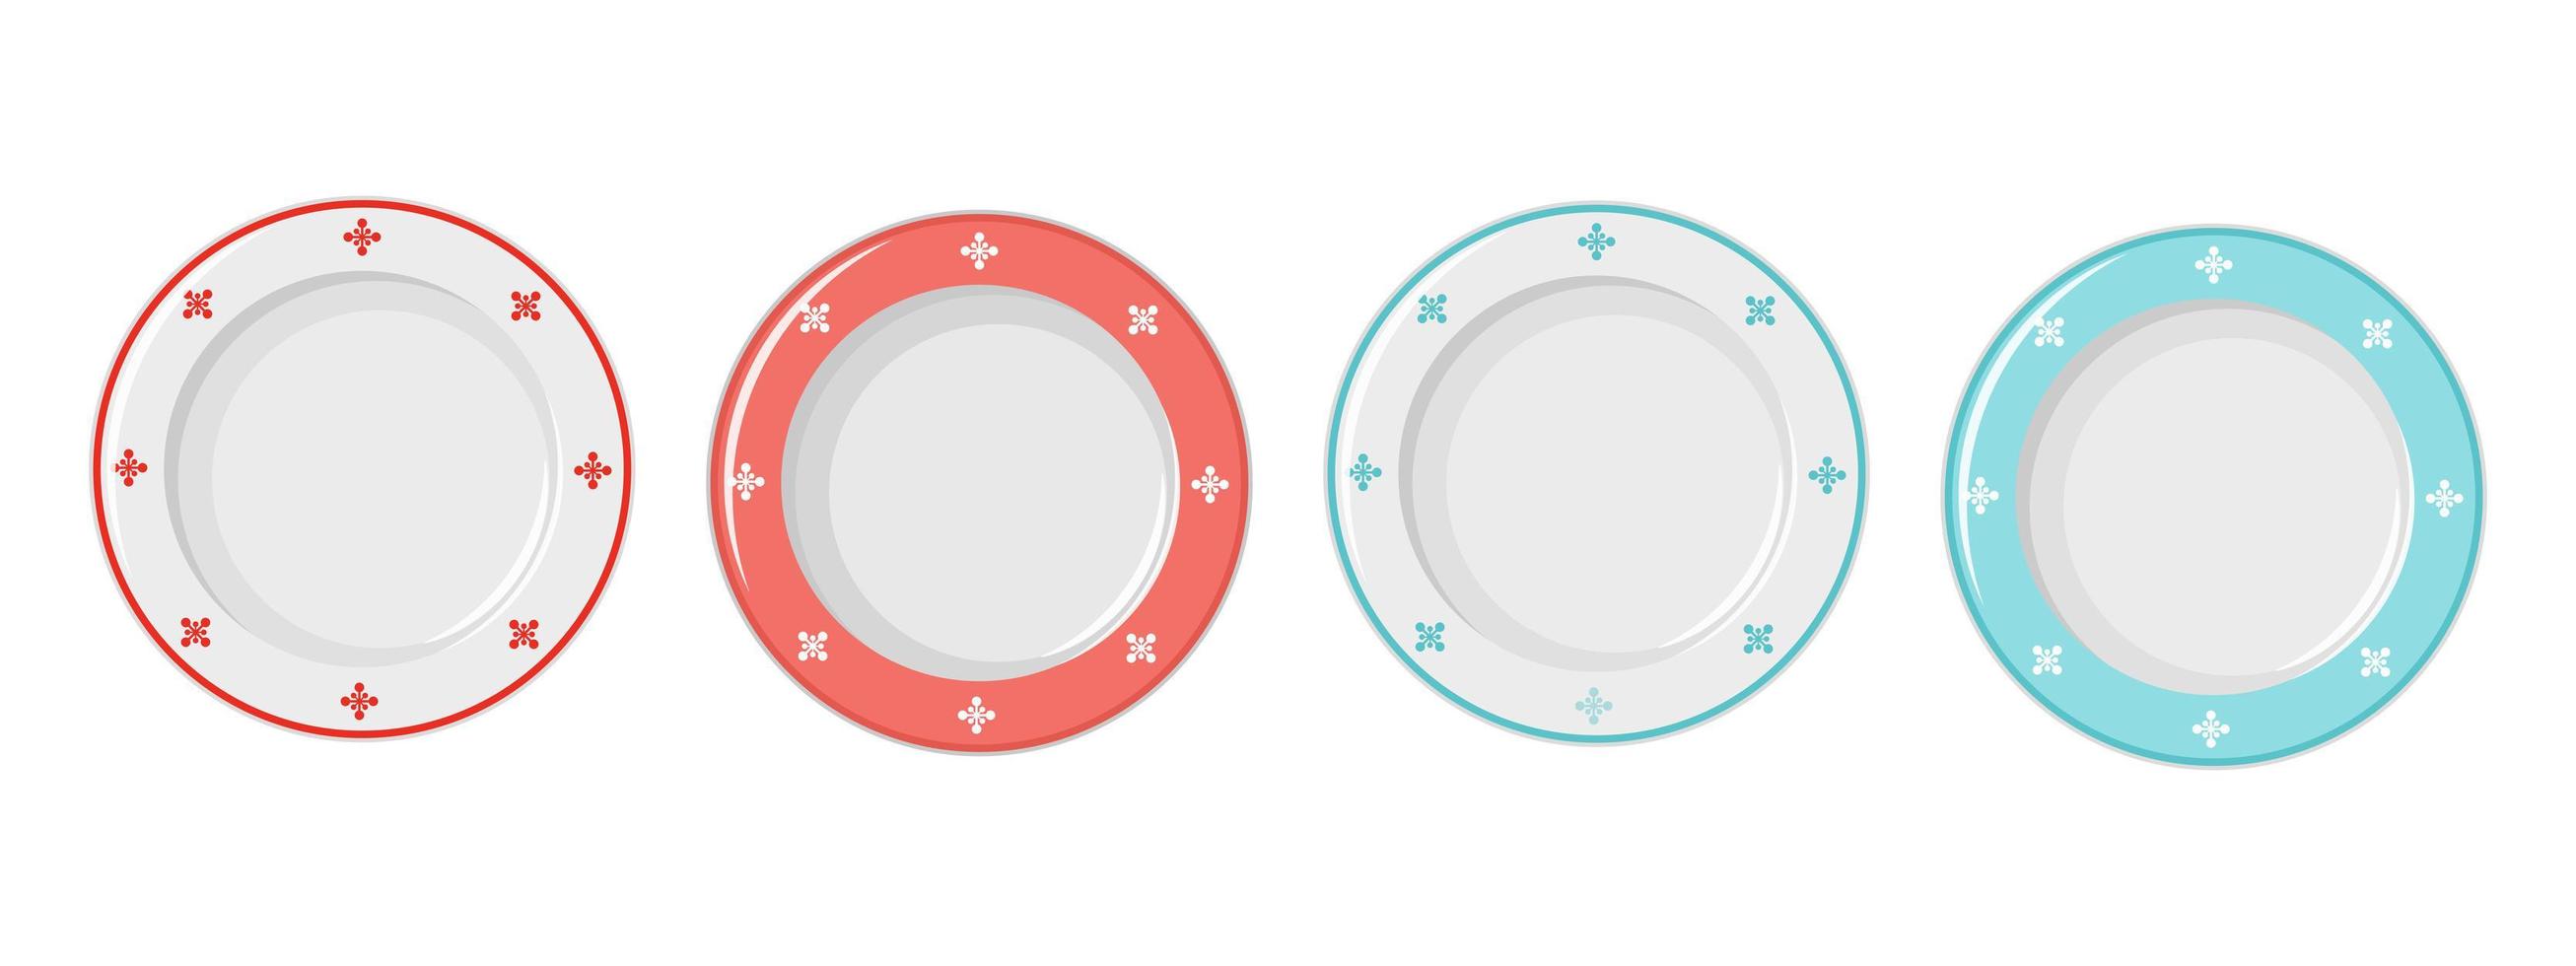 Empty plates with red, blue ornaments, decorated with snowflakes. vector